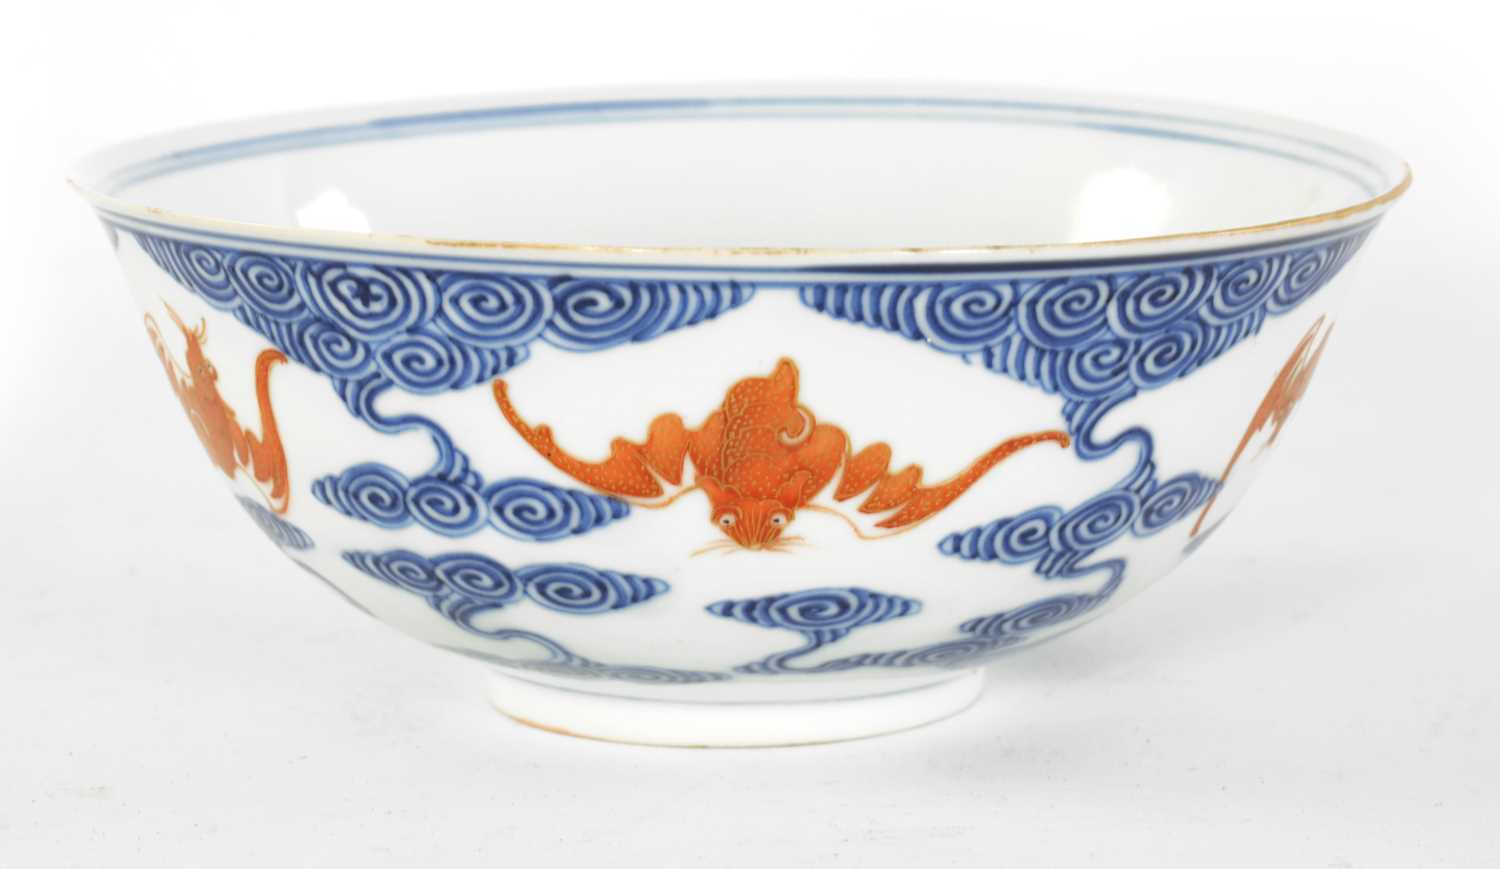 Lot 141 - A CHINESE GUANGXI PERIOD IRON-RED-DECORATED BLUE AND WHITE BAT BOWL